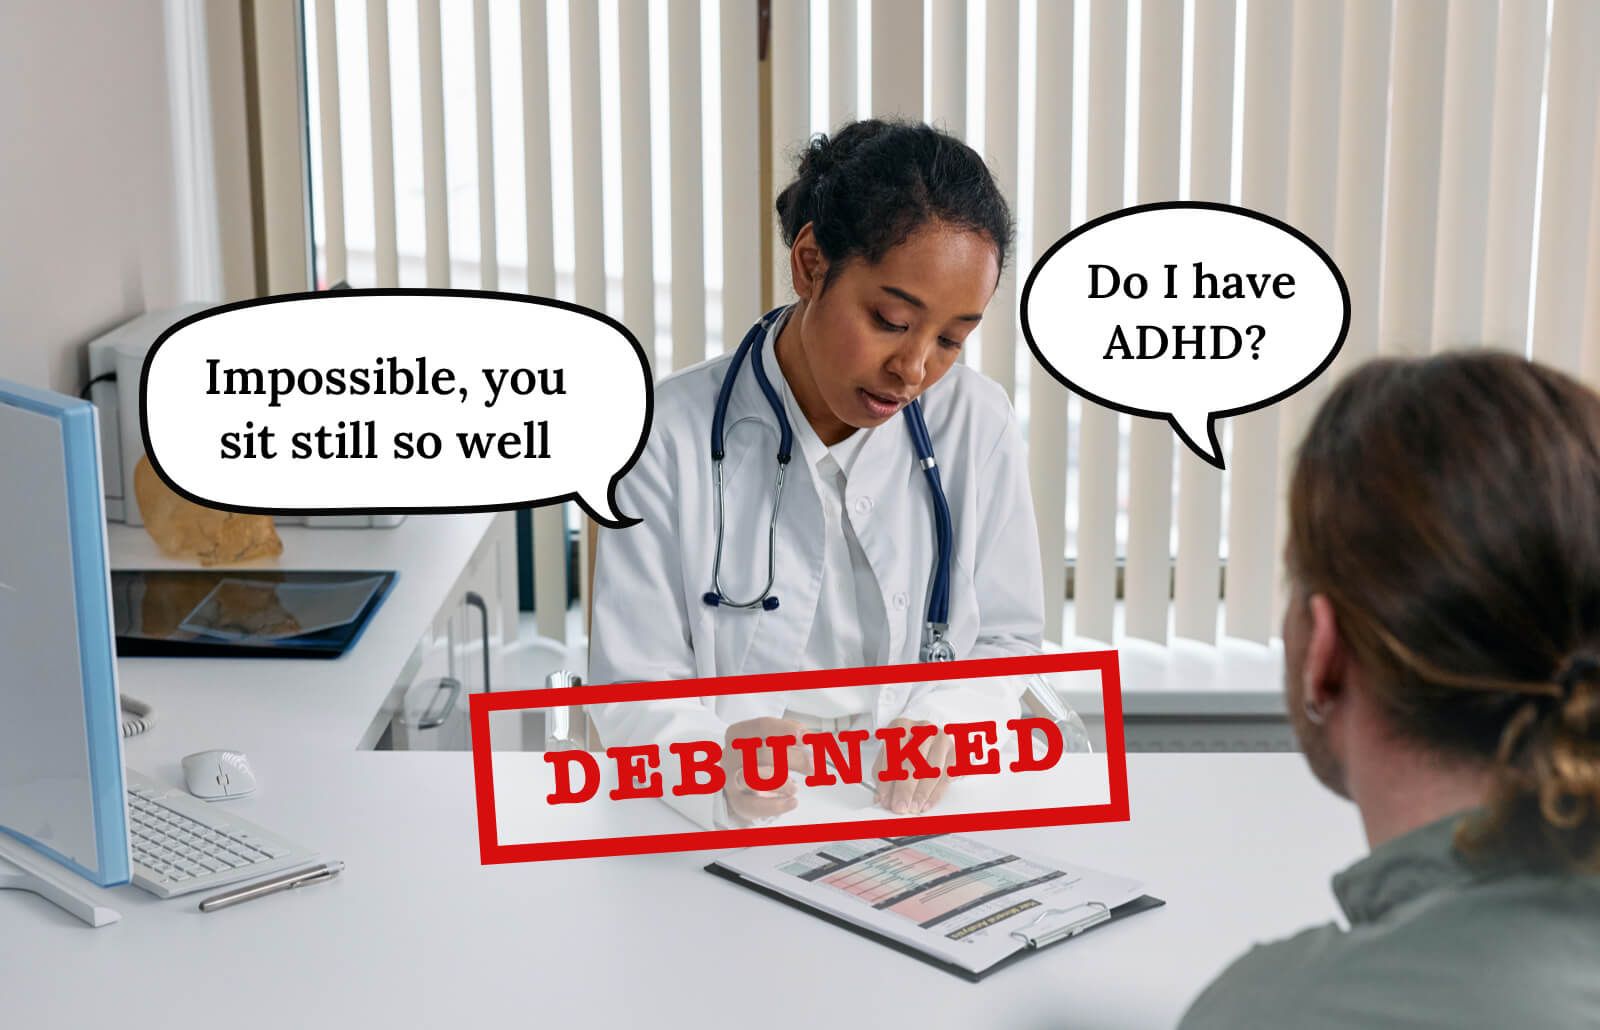 Breaking news: You can have ADHD without being ’hyper’